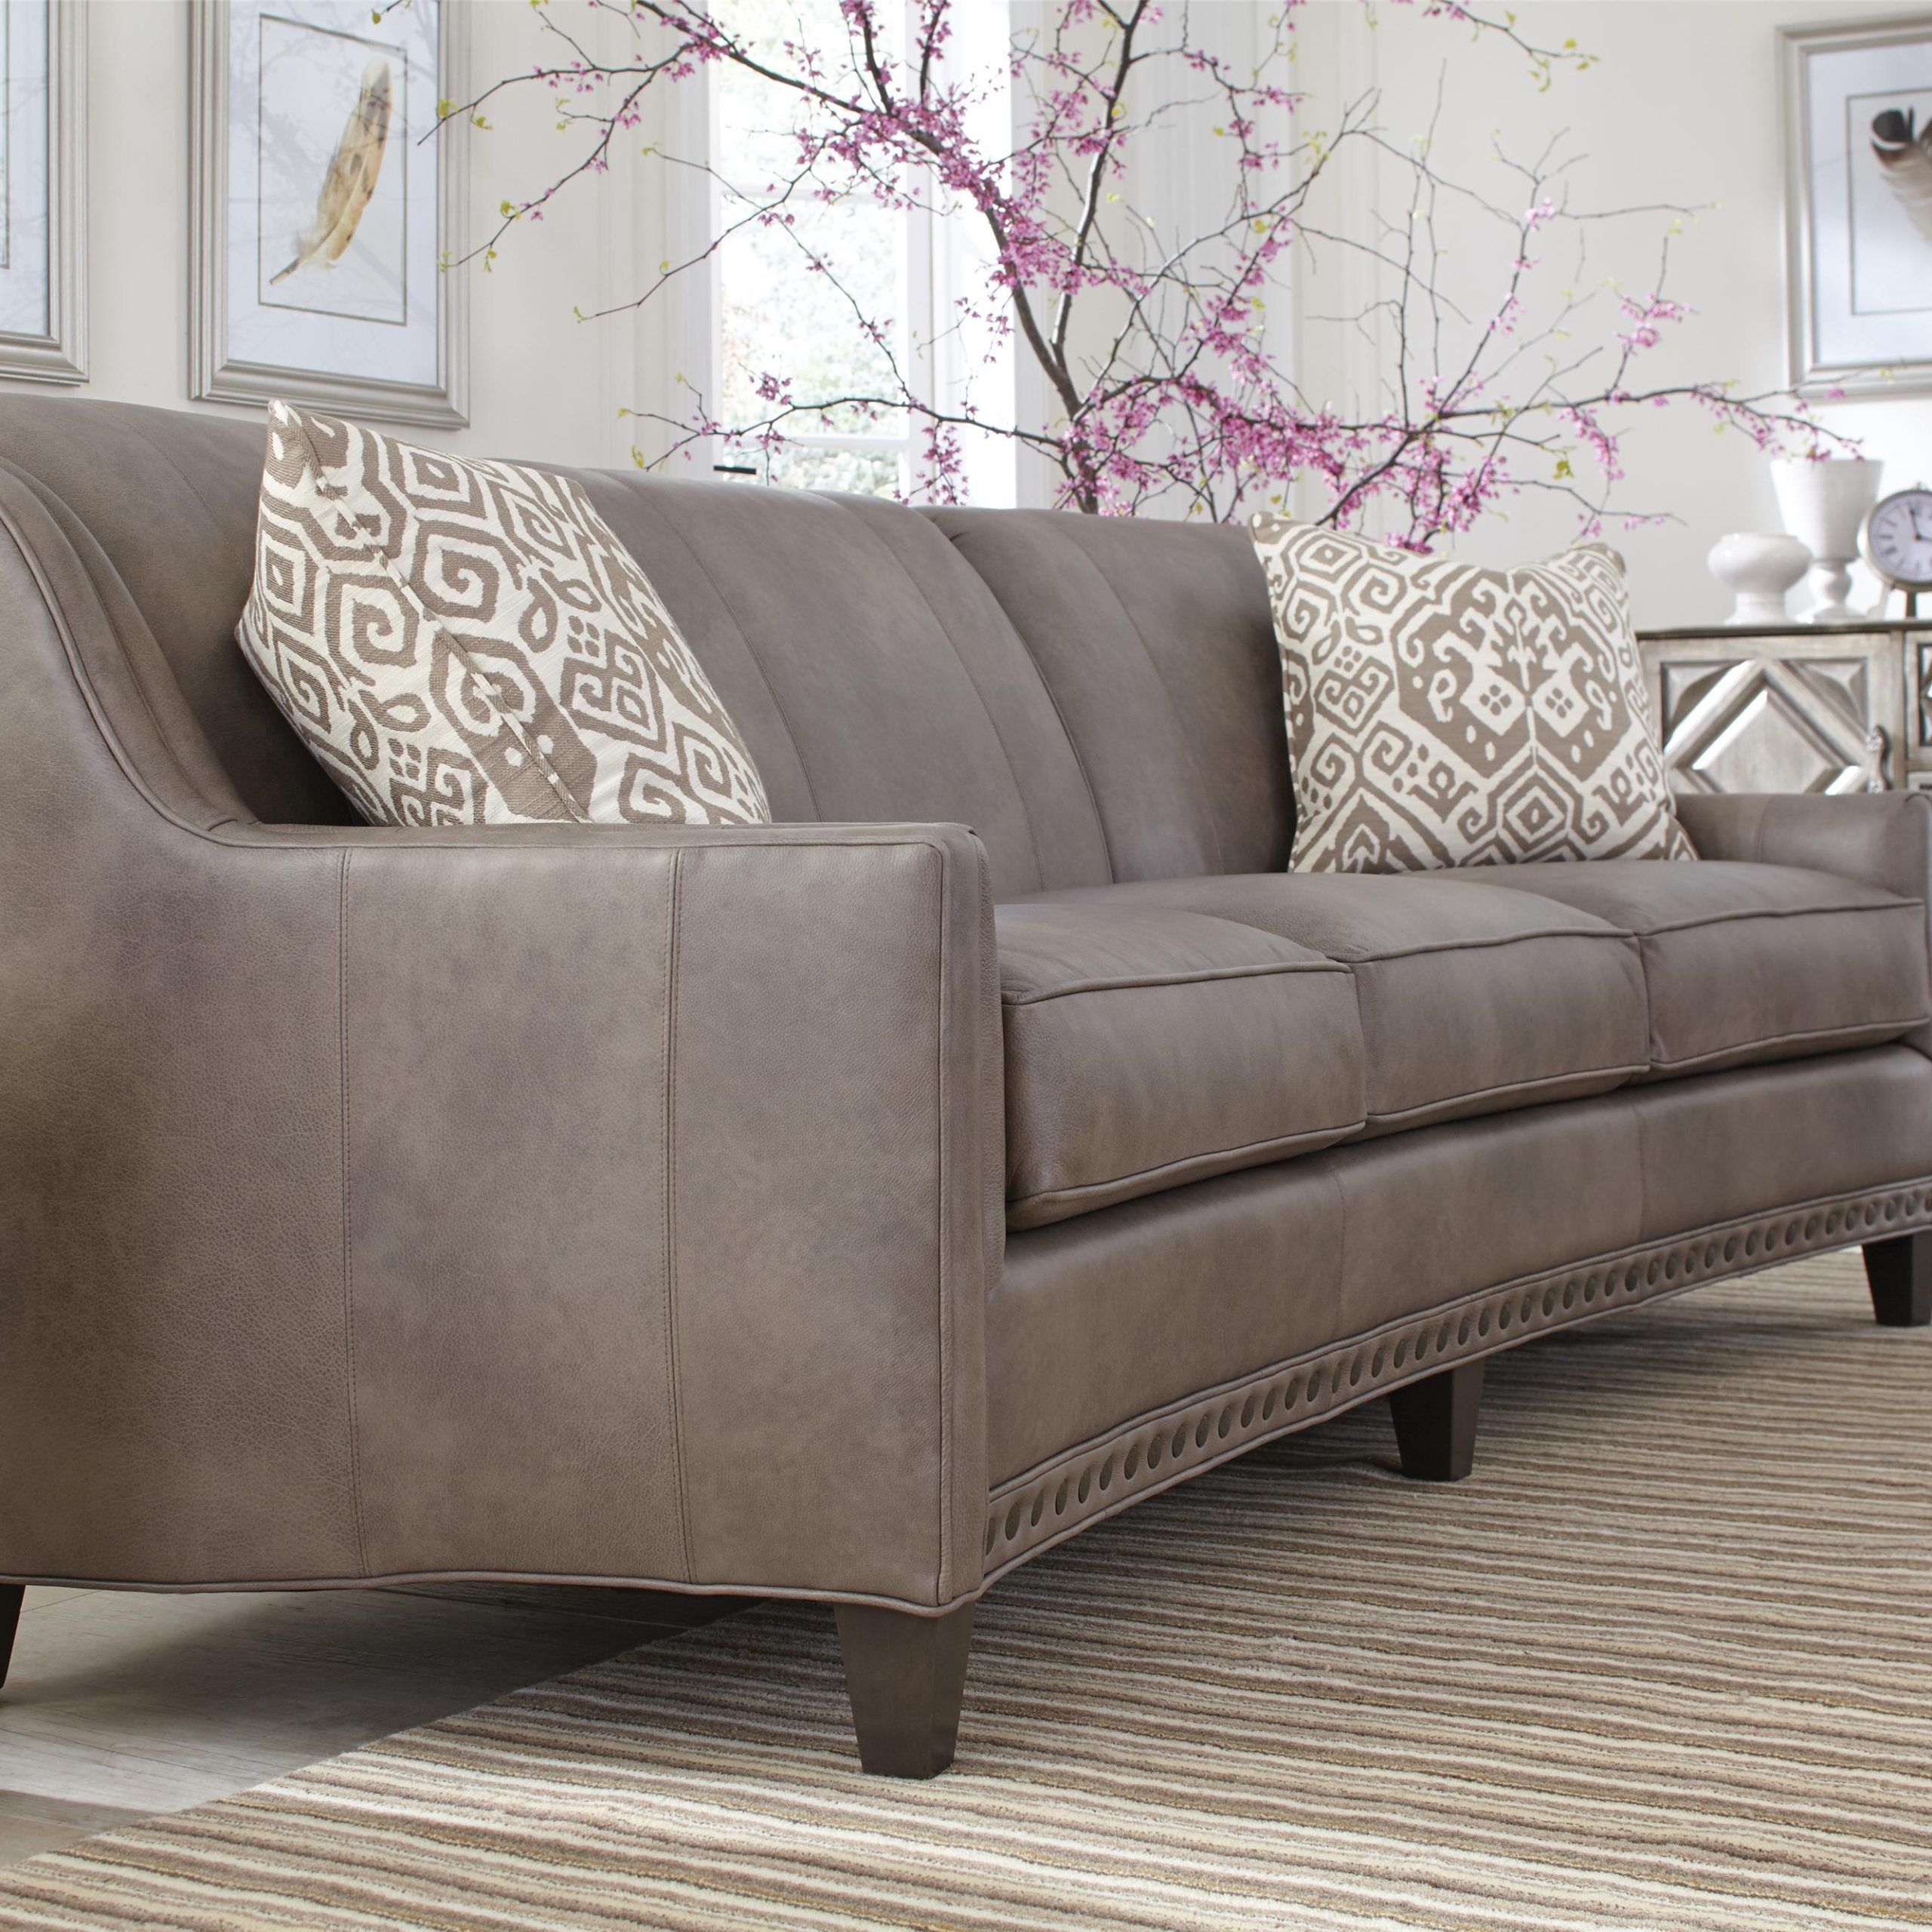 Smith Brothers 227 Slightly Curved Sofa With Sloping Track Arms And In Sofas With Curved Arms (View 16 of 20)